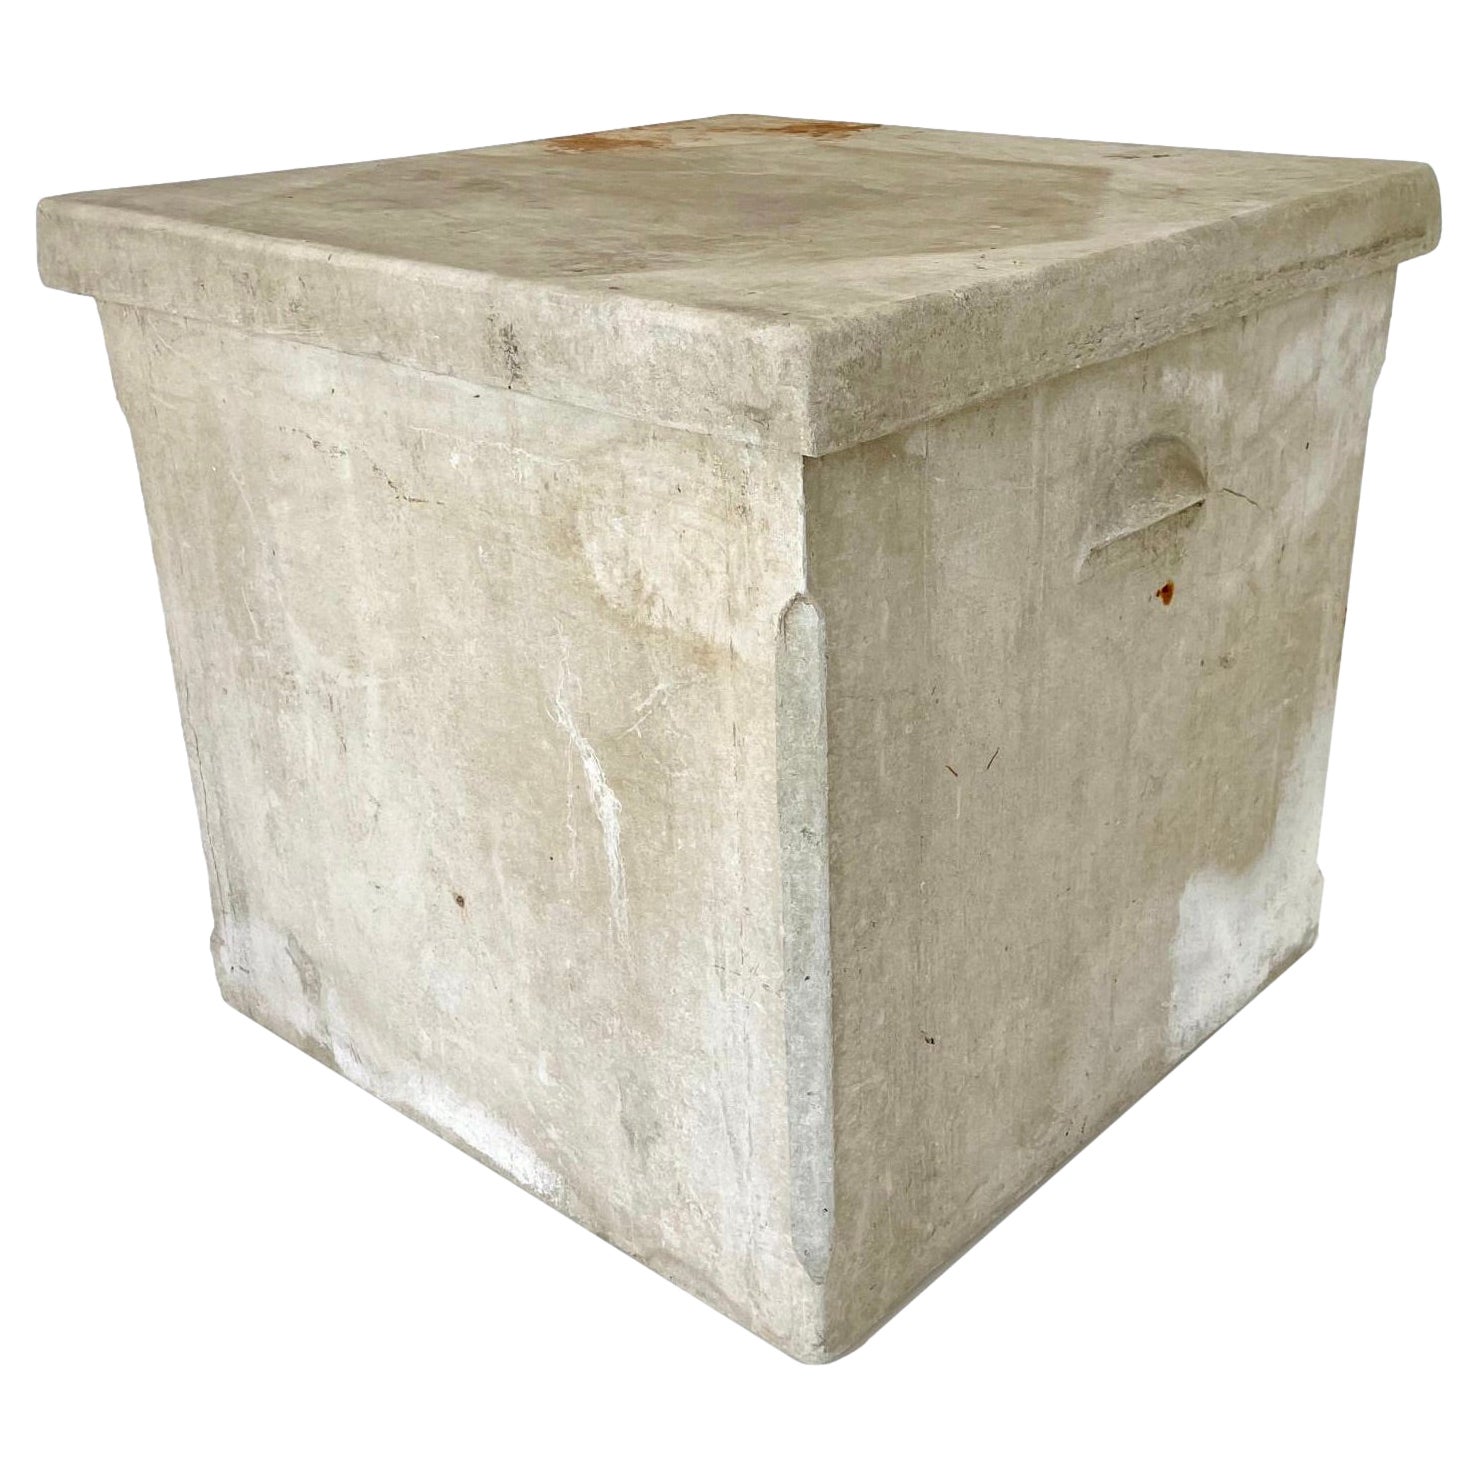 Willy Guhl Concrete Box with Lid, 1960s Switzerland For Sale